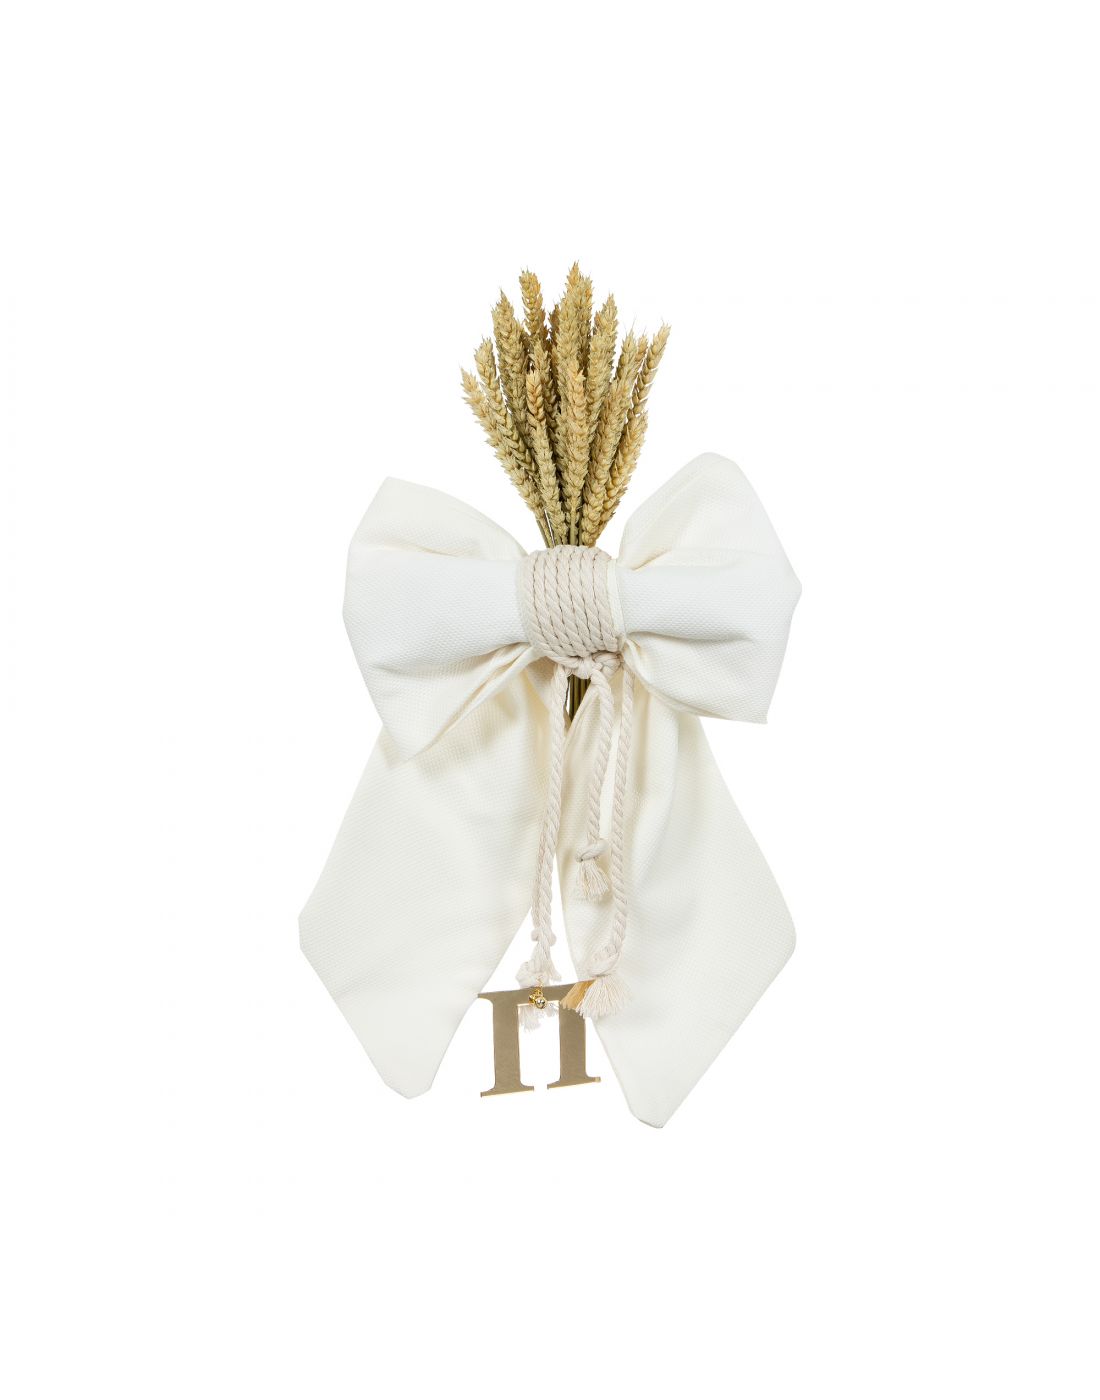 Lapin House Bapteme Decoration with Monogram and Straws